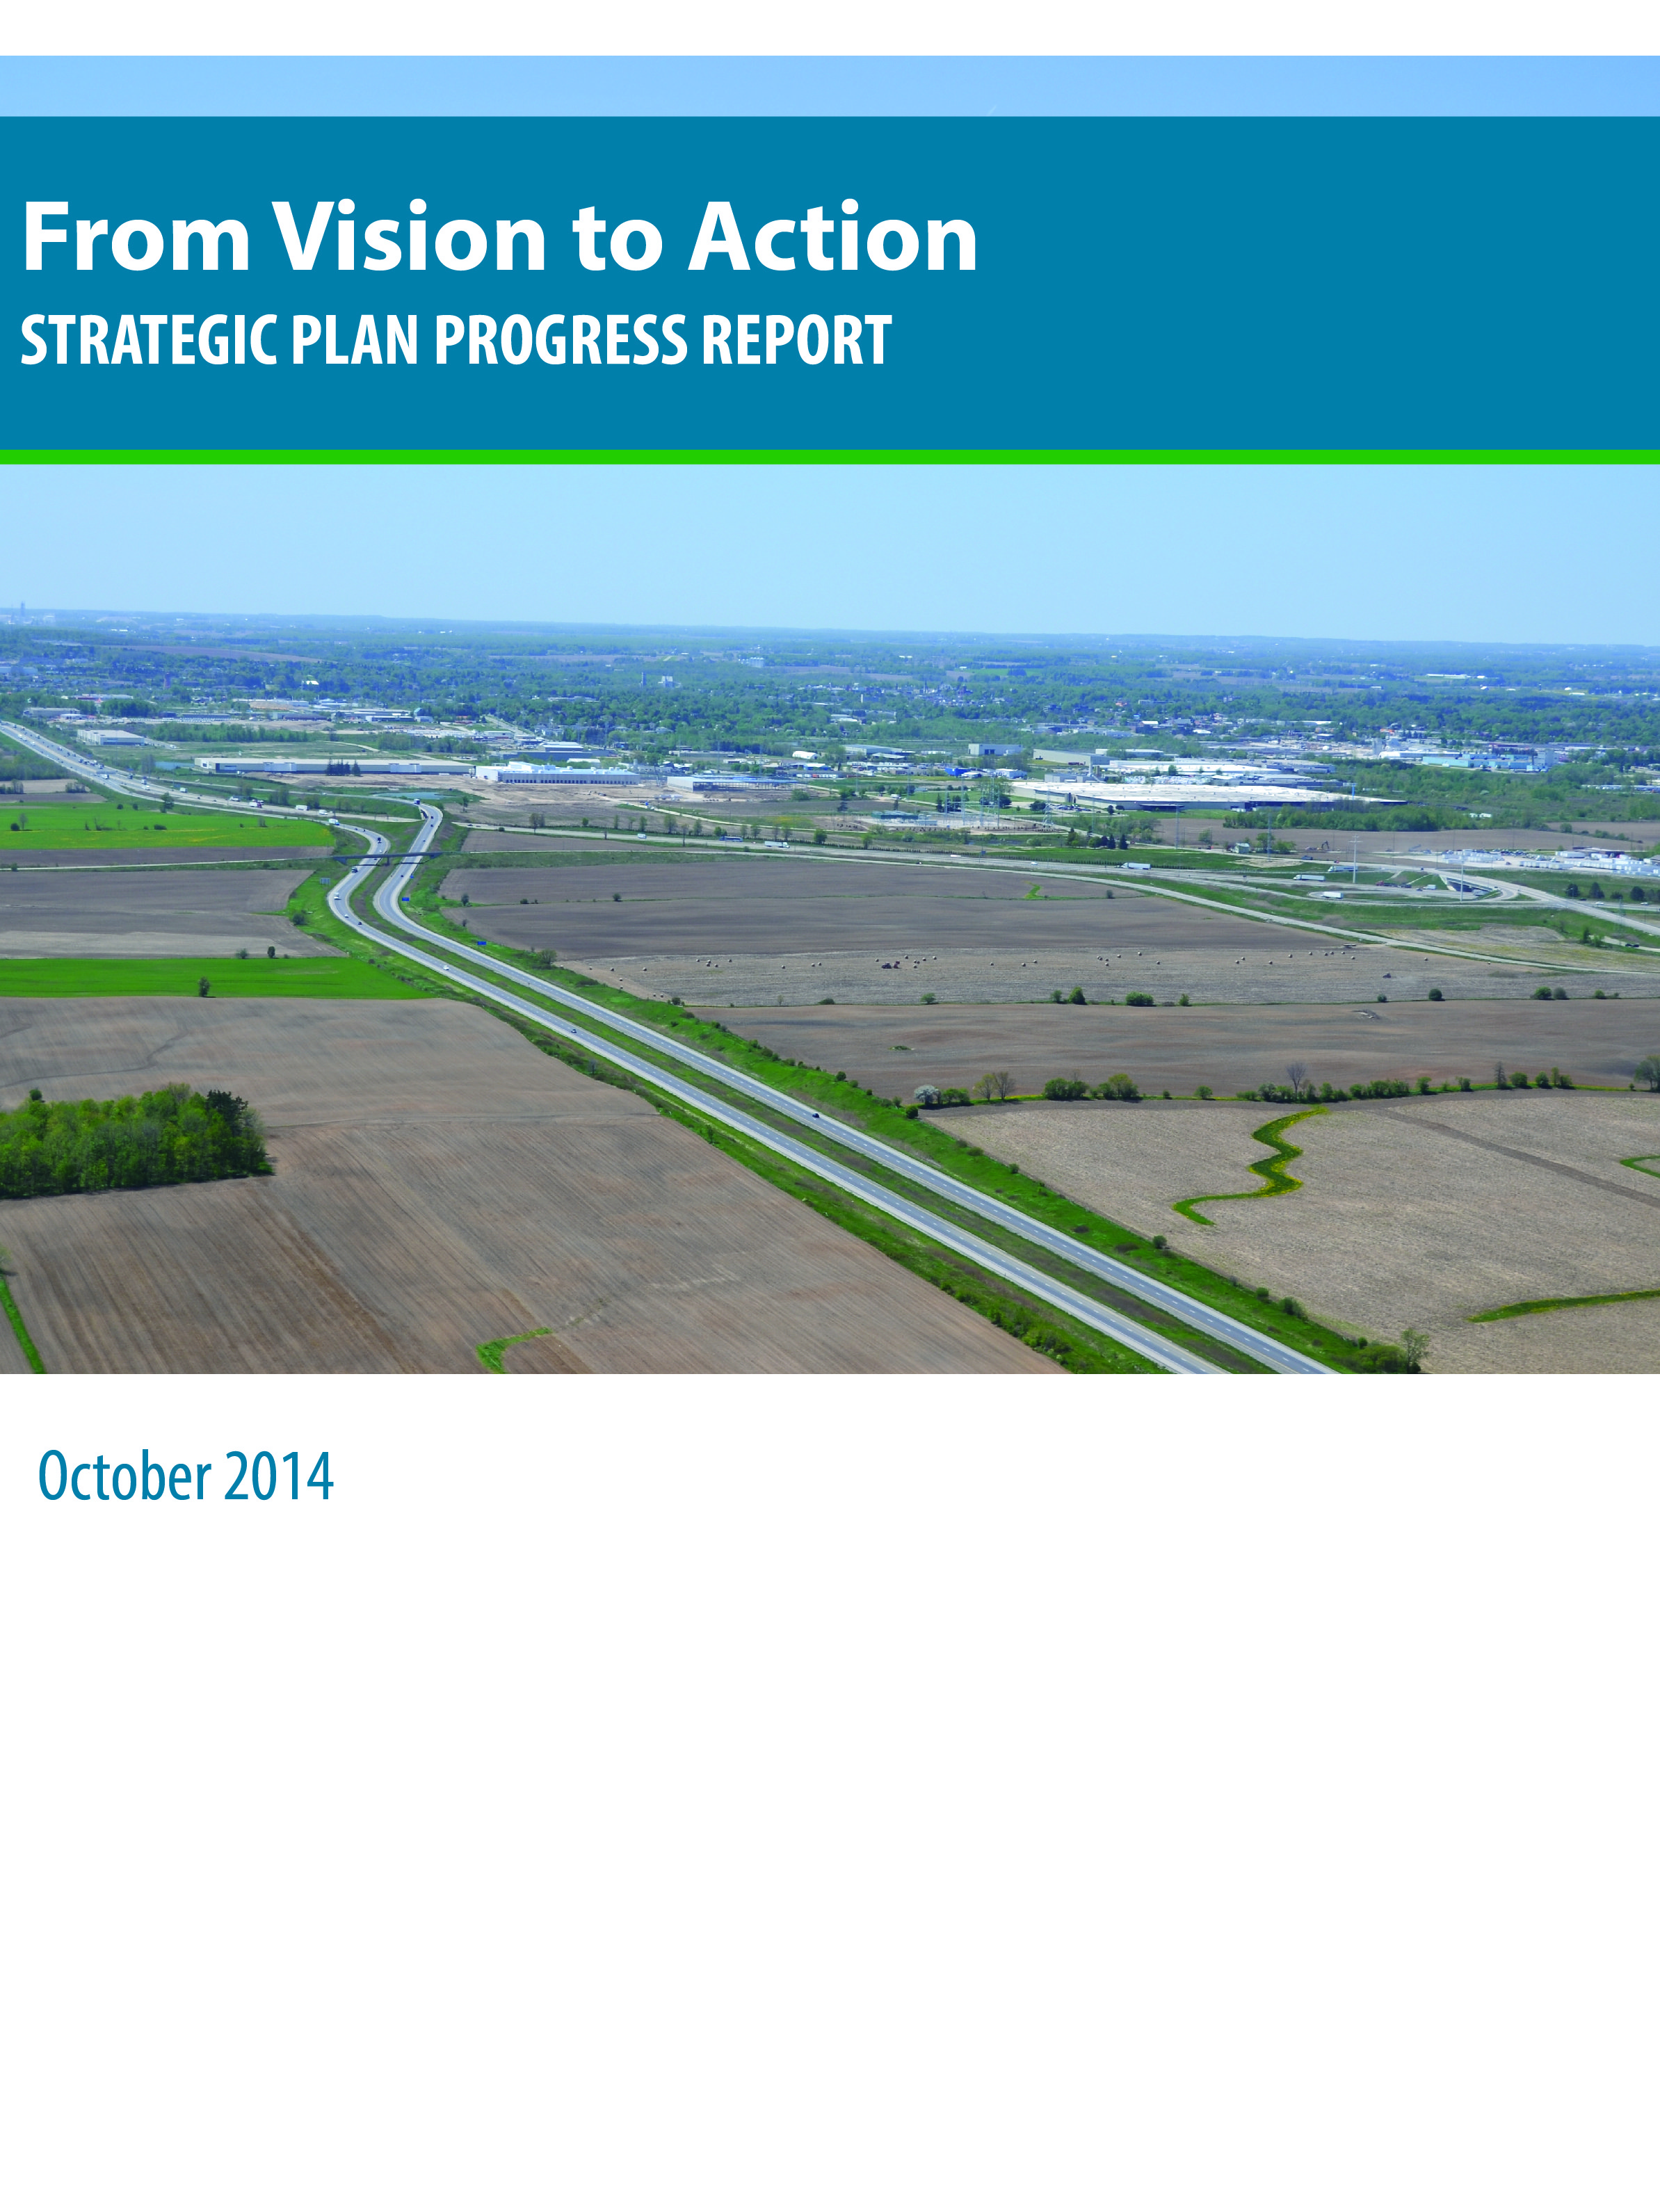 Vision to action strategic plan cover